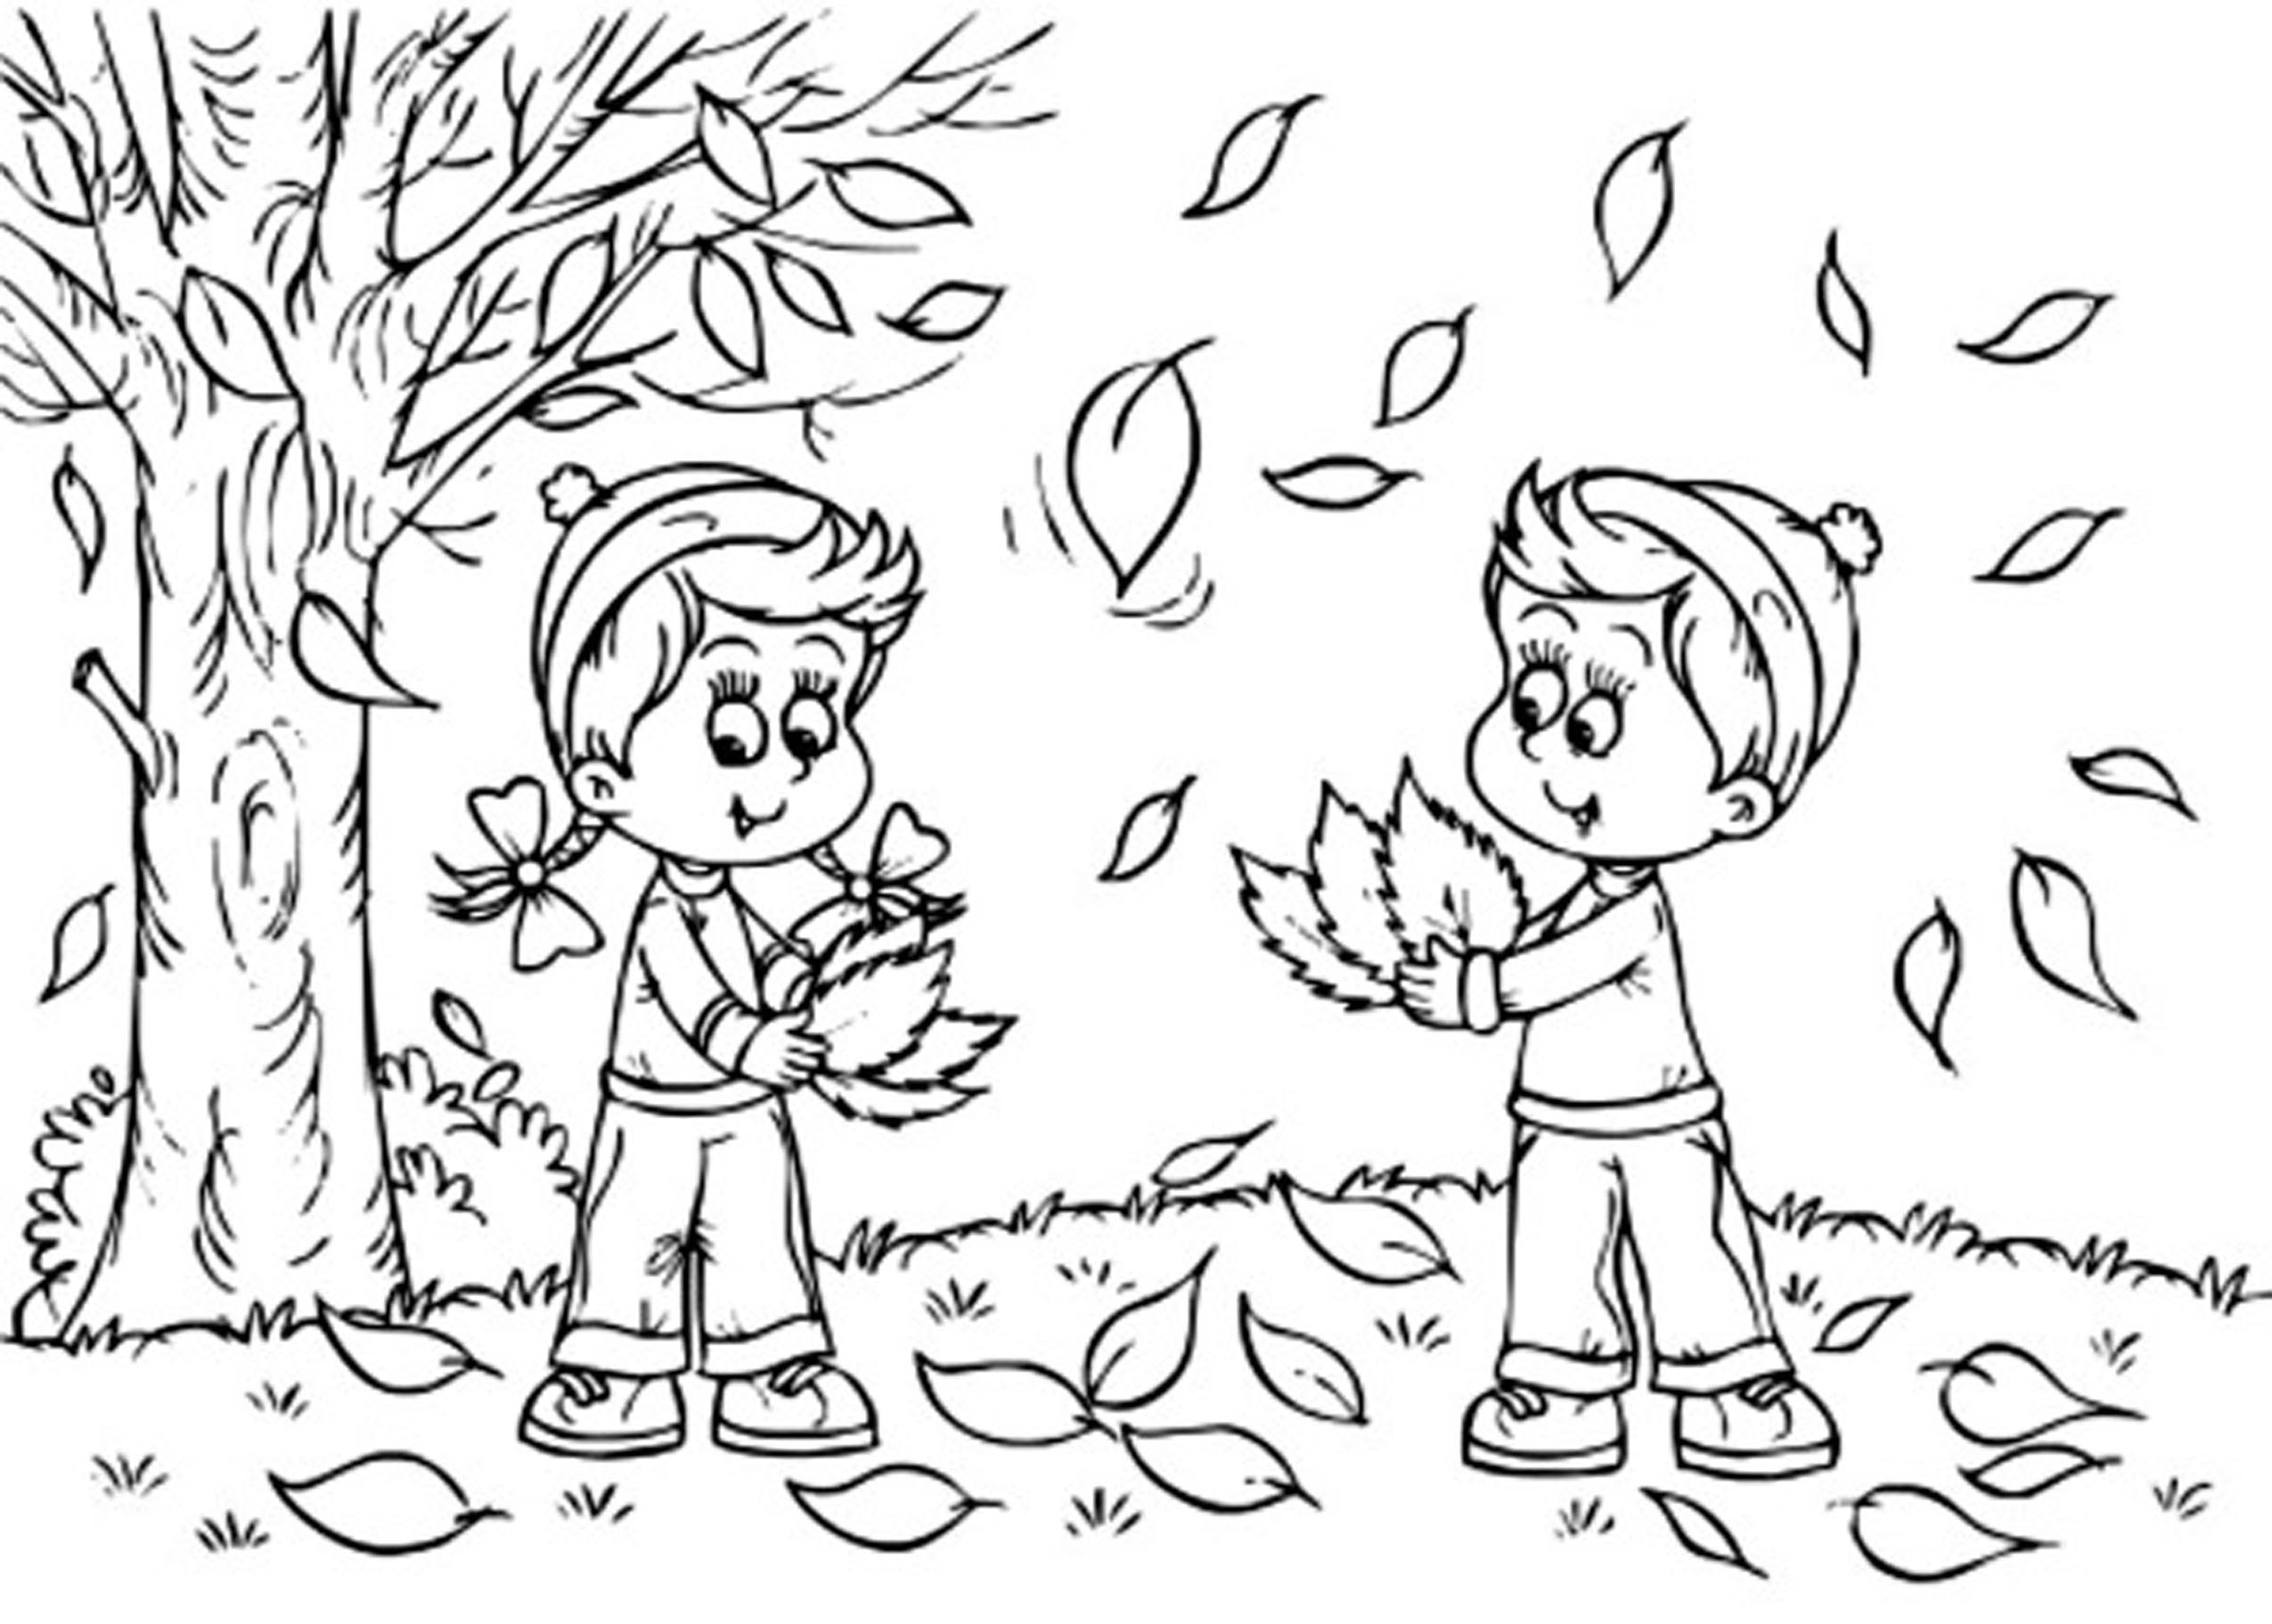 a-black-and-white-drawing-of-two-buckets-filled-with-leaves